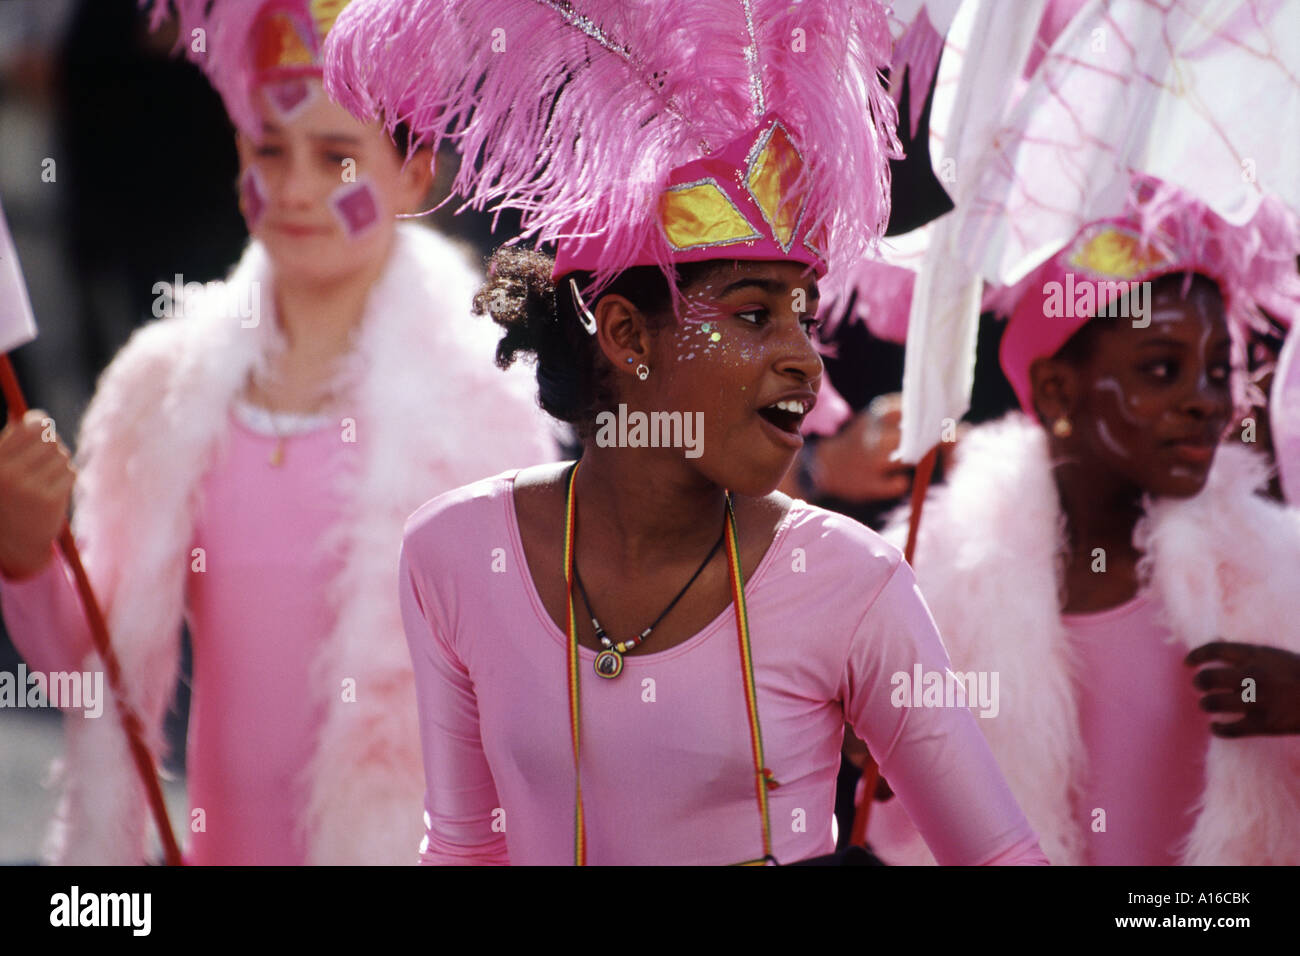 A young African girl in pink costume and feathered hat dancing in the streets at the Notting Hill Carnival London 2000 Stock Photo